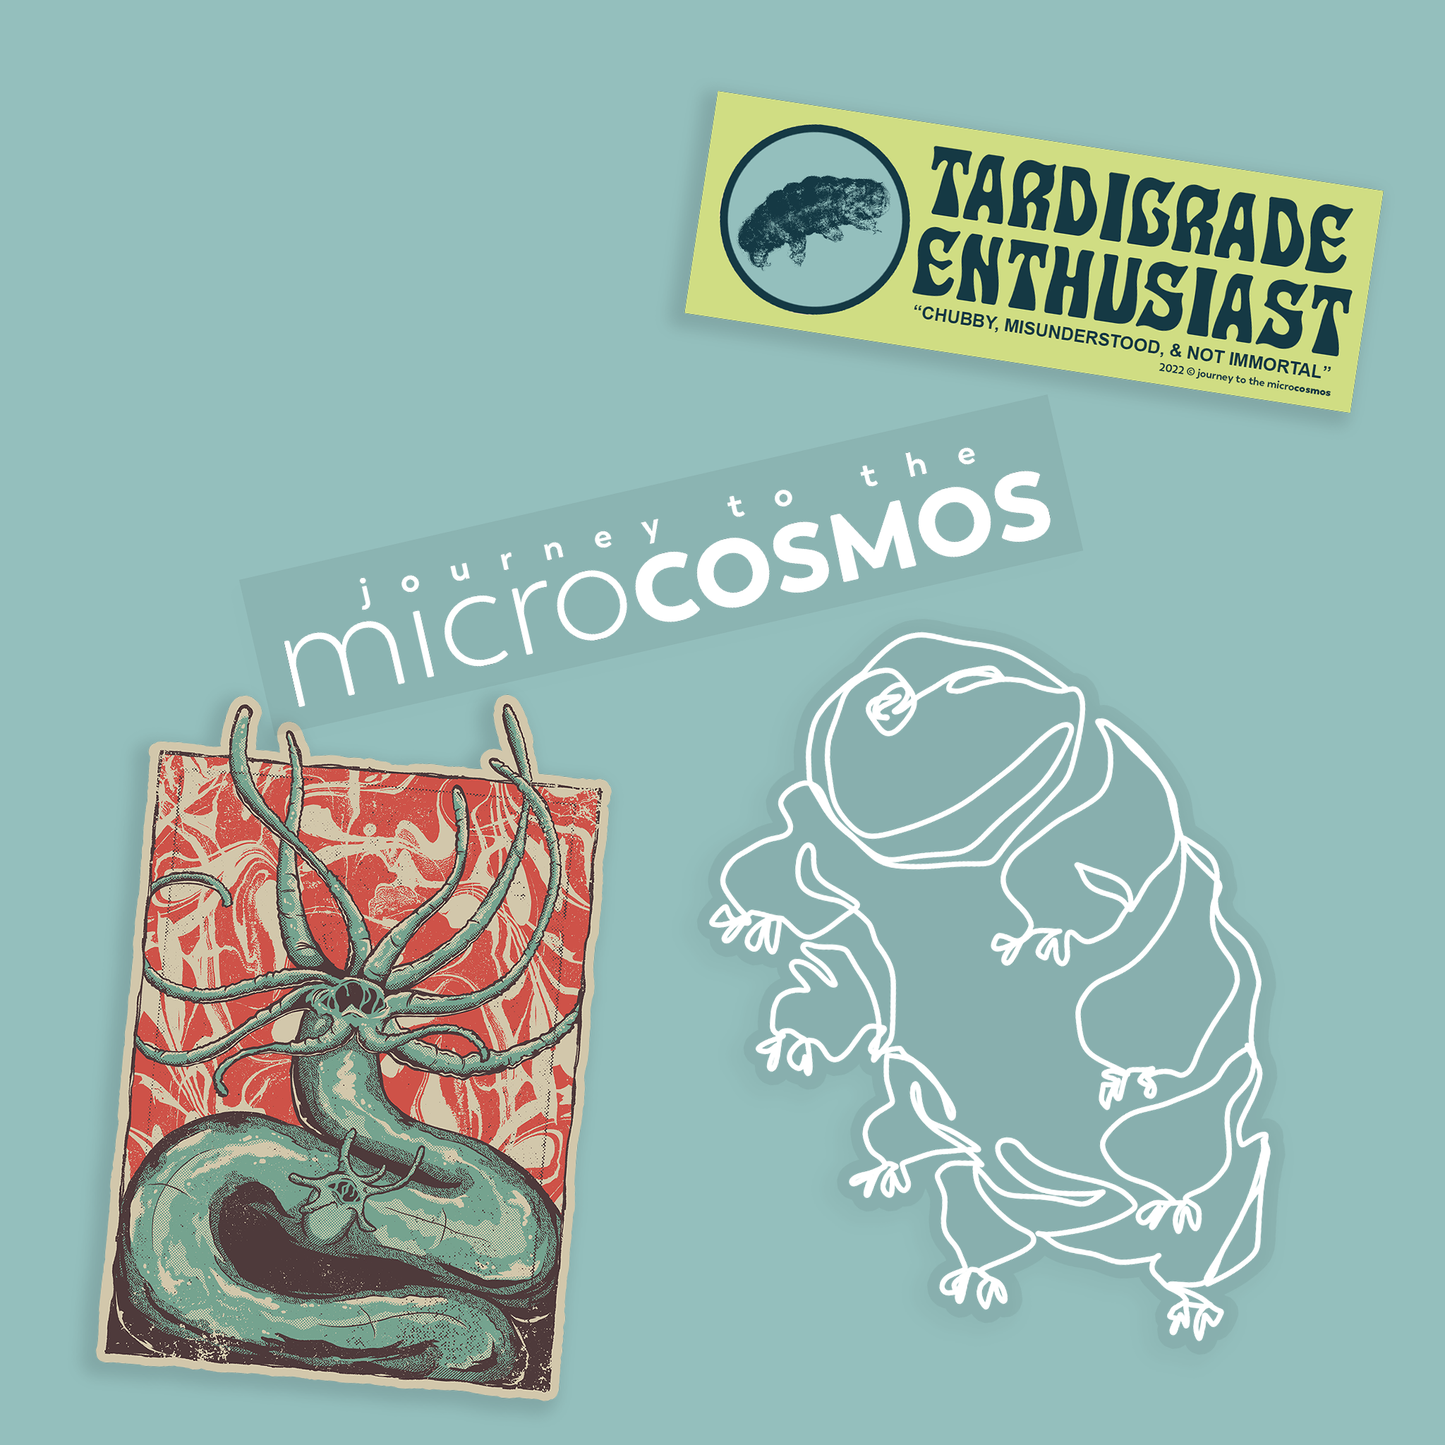 The Microcosmos Sticker Pack